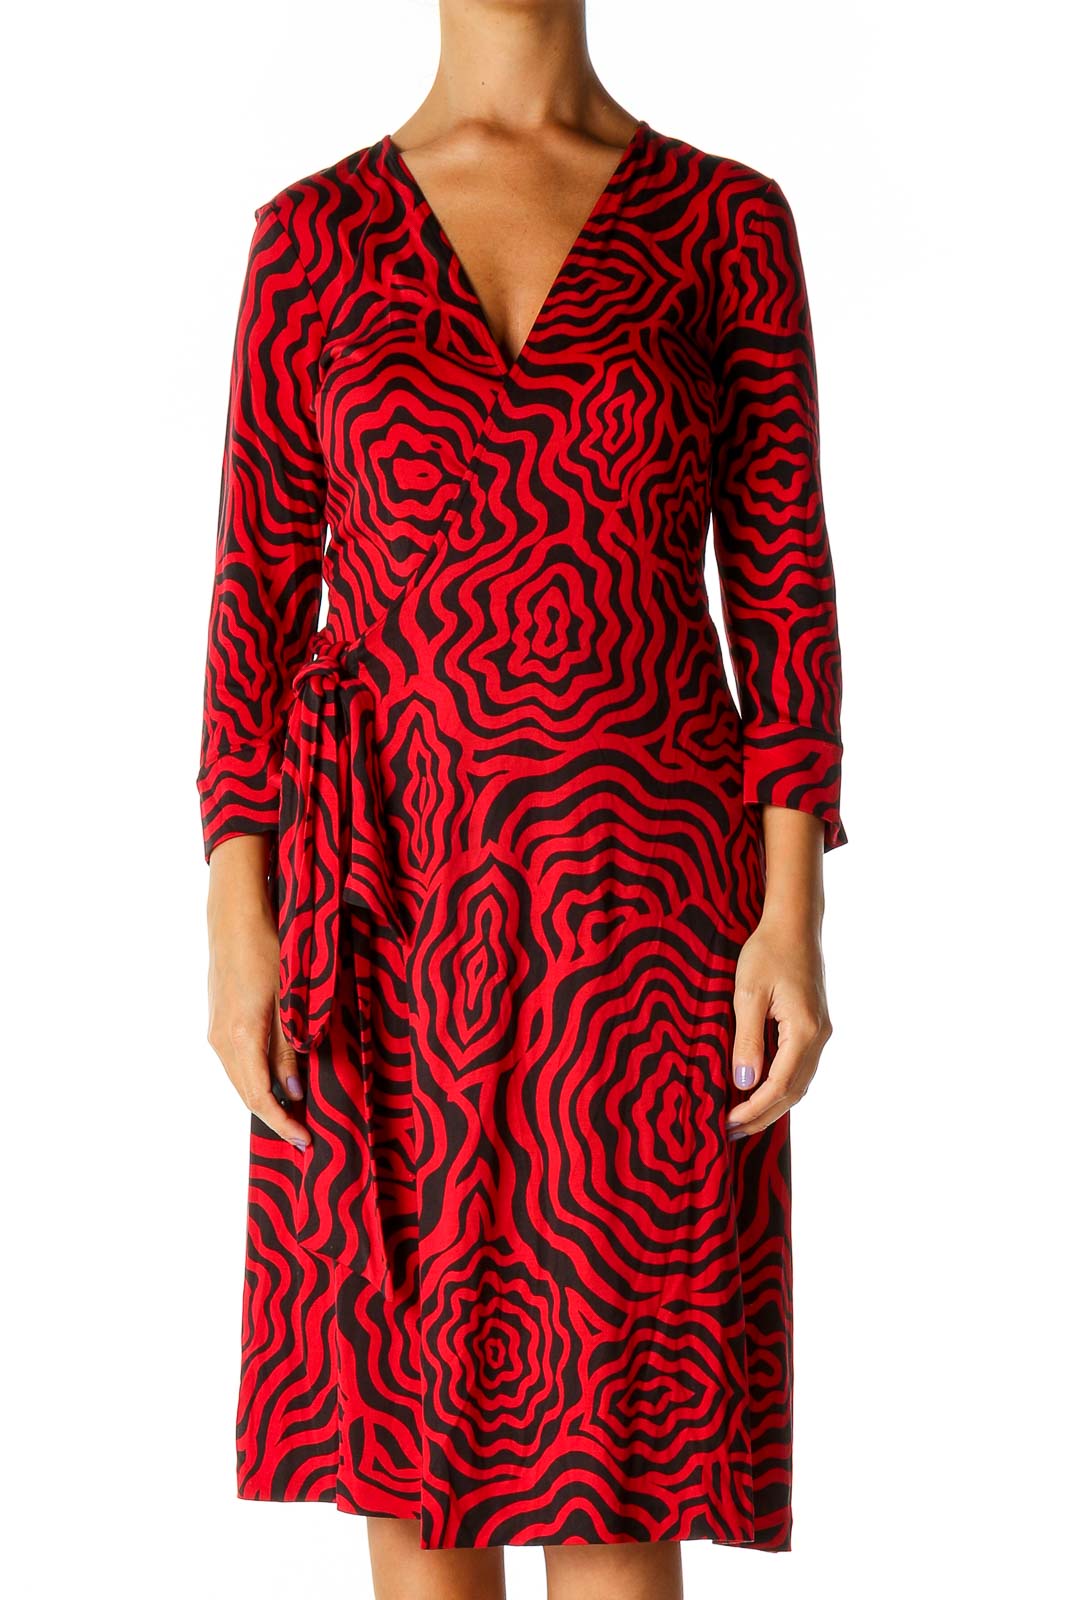 Red Floral Print Bohemian Shift Dress Front